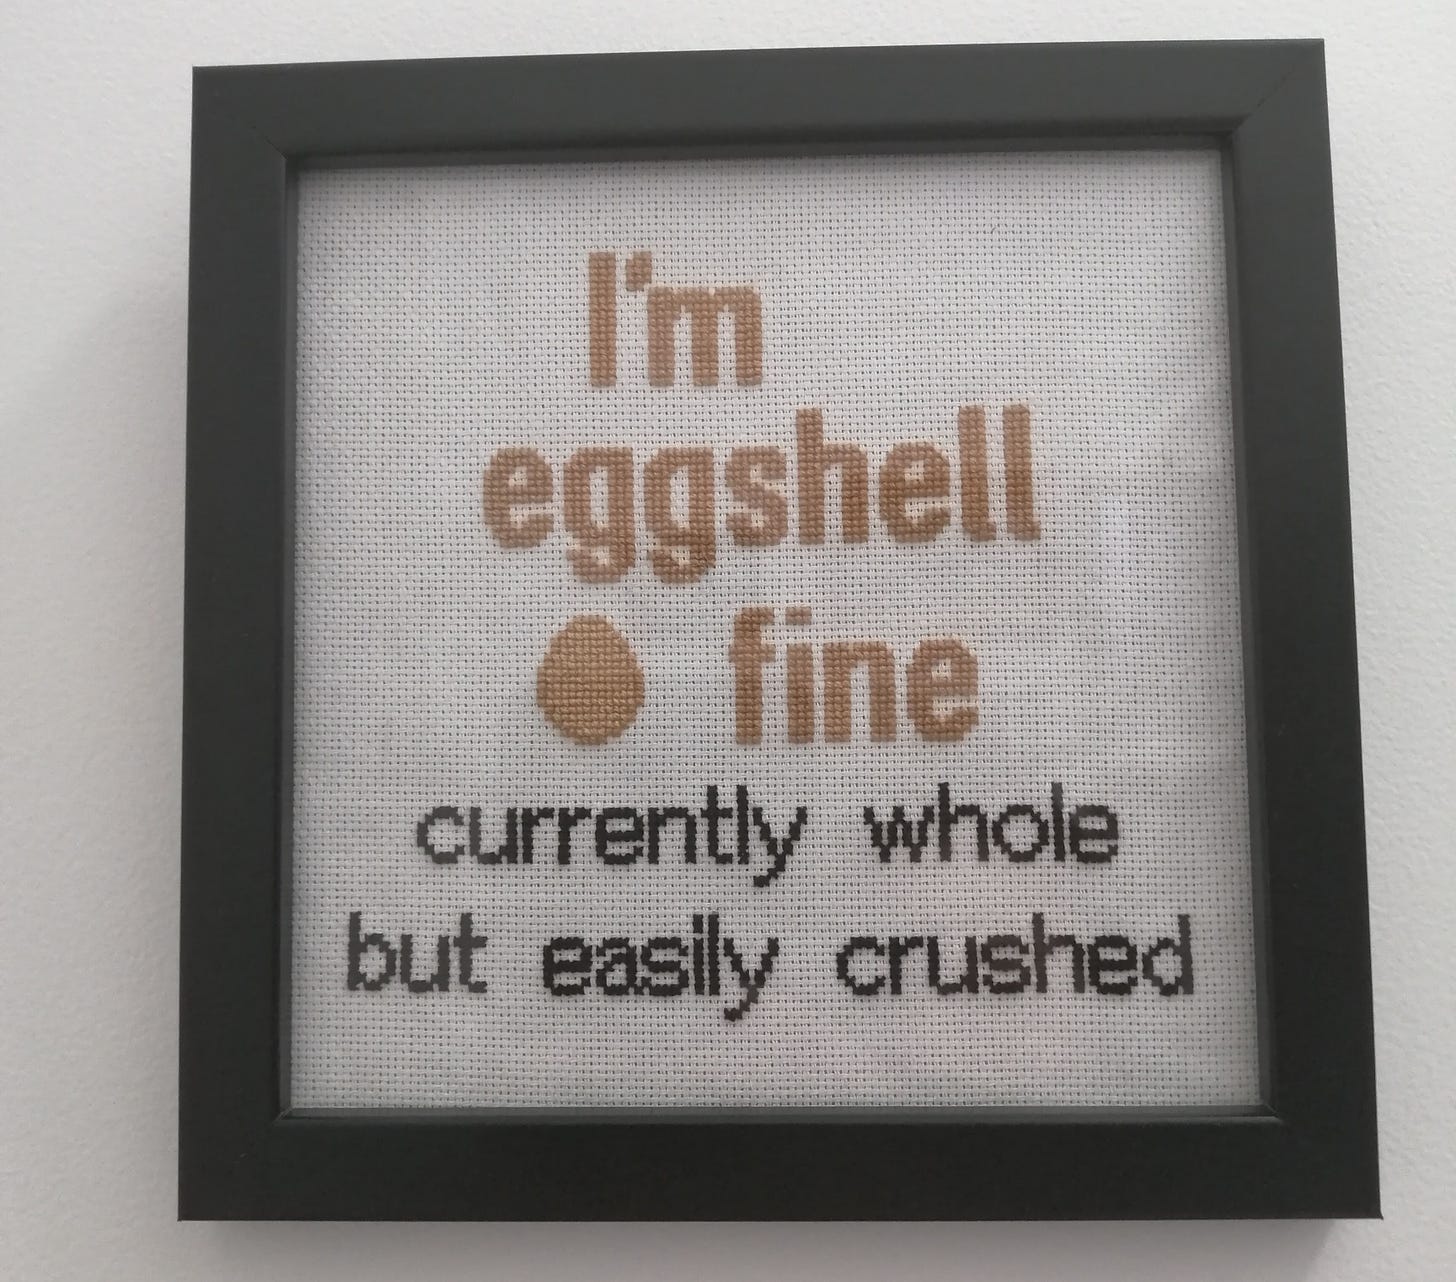 Cross stitch in a frame with eggshell coloured text that reads "I'm eggshell fine" with a picture of an egg then black text that reads "currently whole but easily crushed"